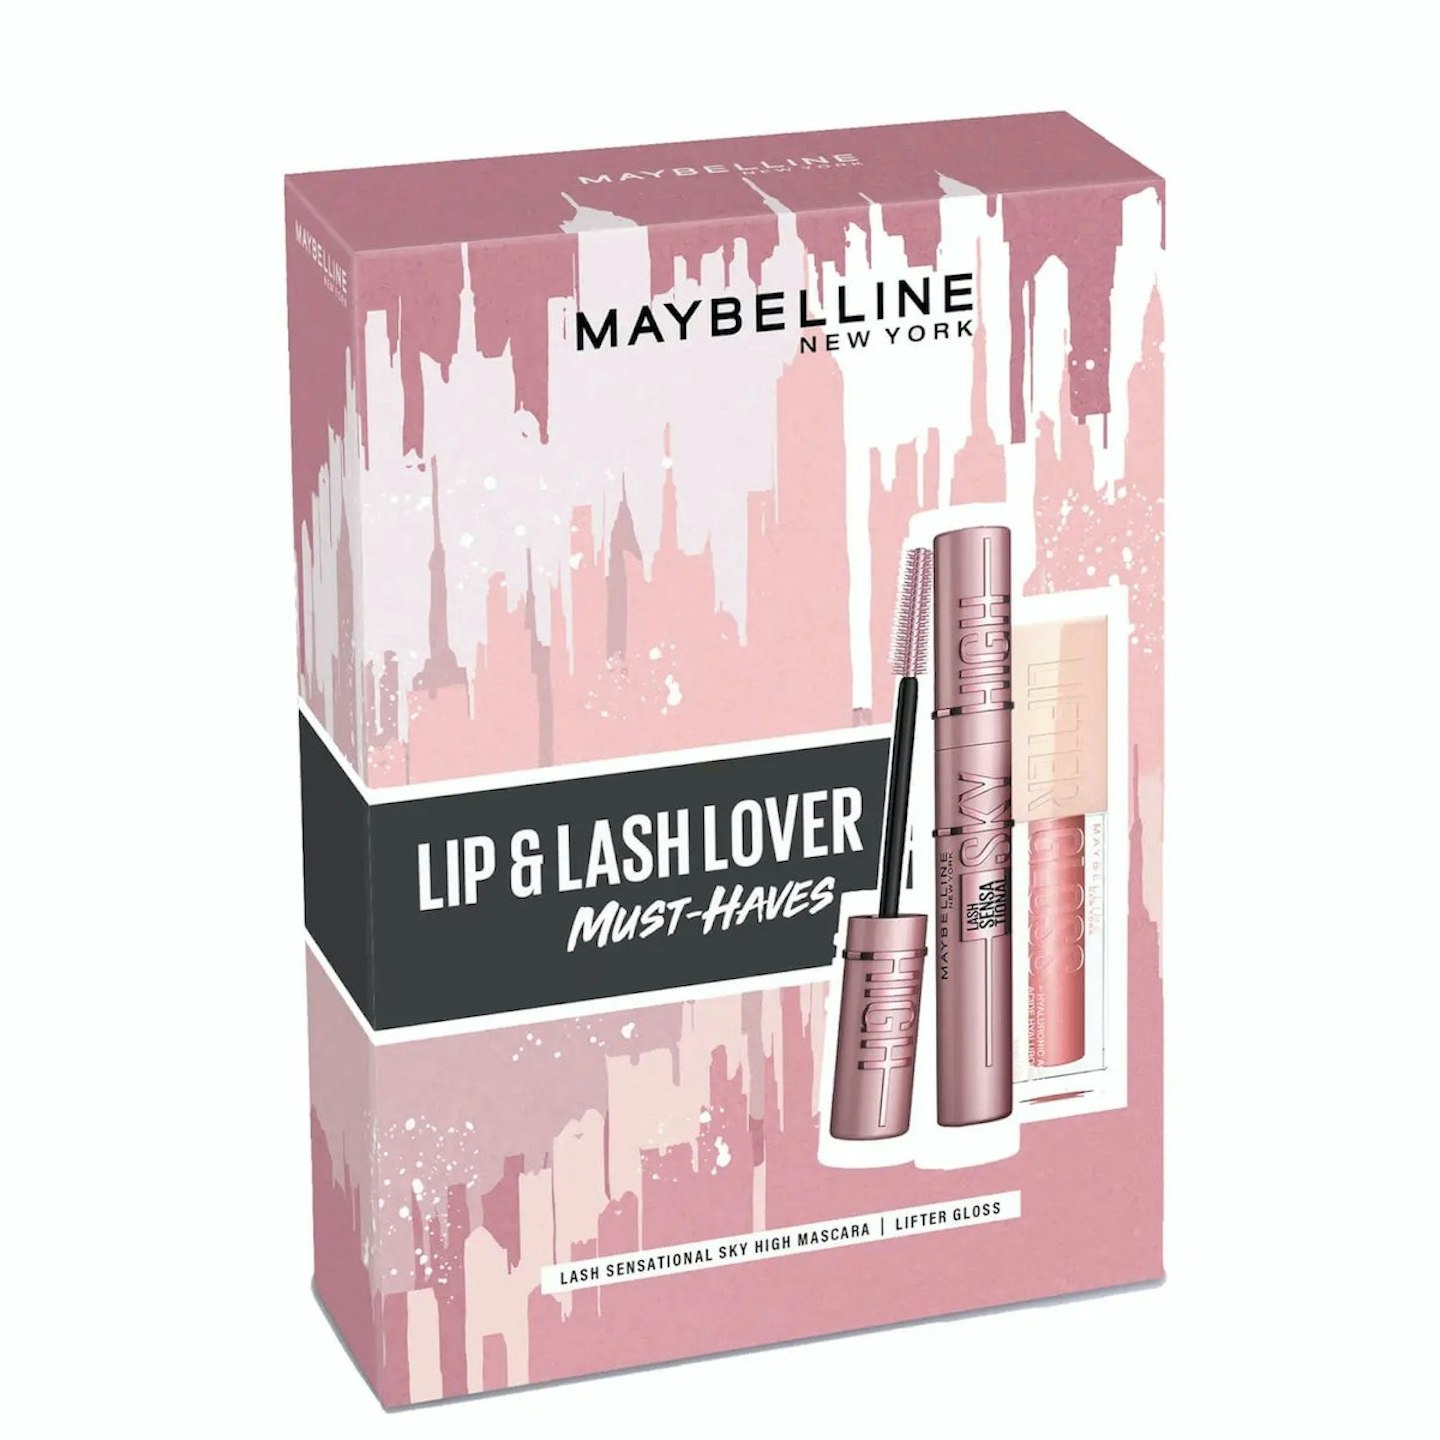 Maybelline New York Lip and Lash Lover Must-Haves Gift Set